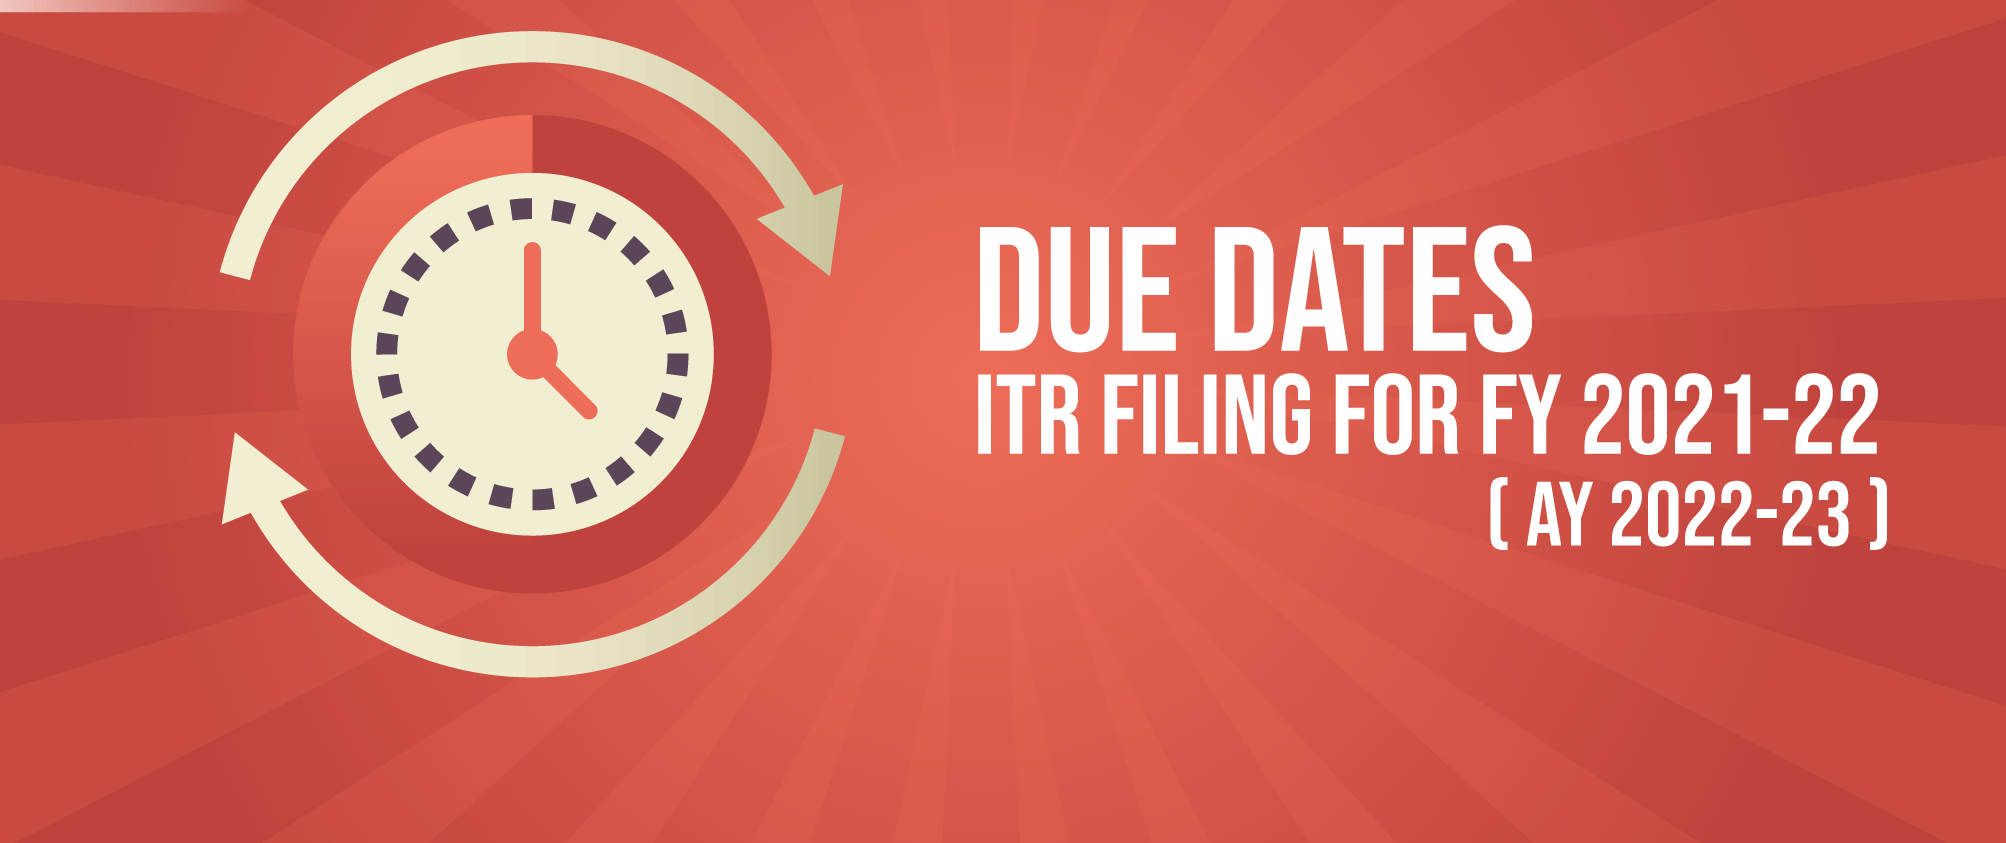 Due-date-ITR AY 2022-23.